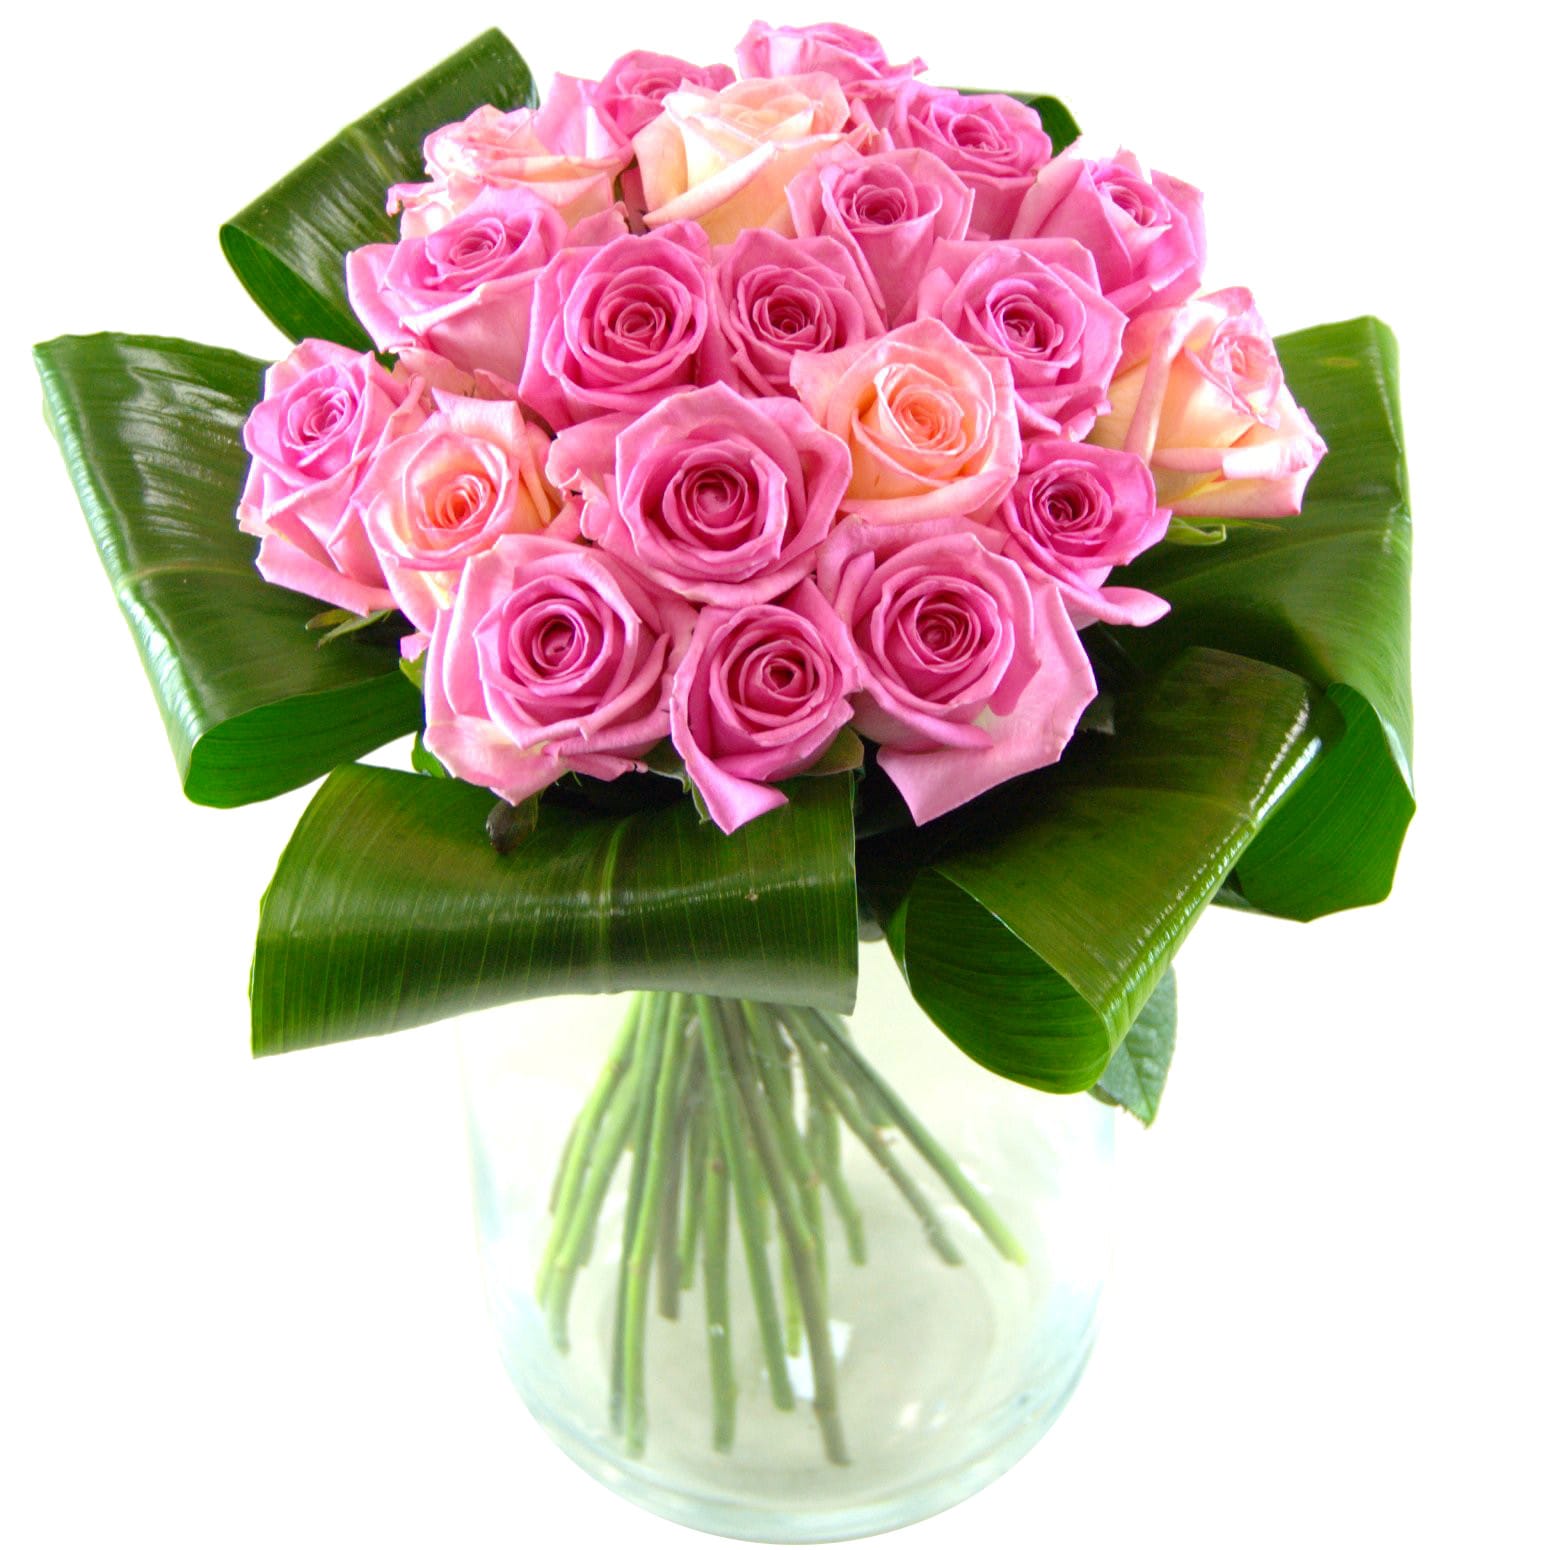 Grace Pink Roses Fresh Flower Bouquet | Beautiful Pink Roses Hand ...